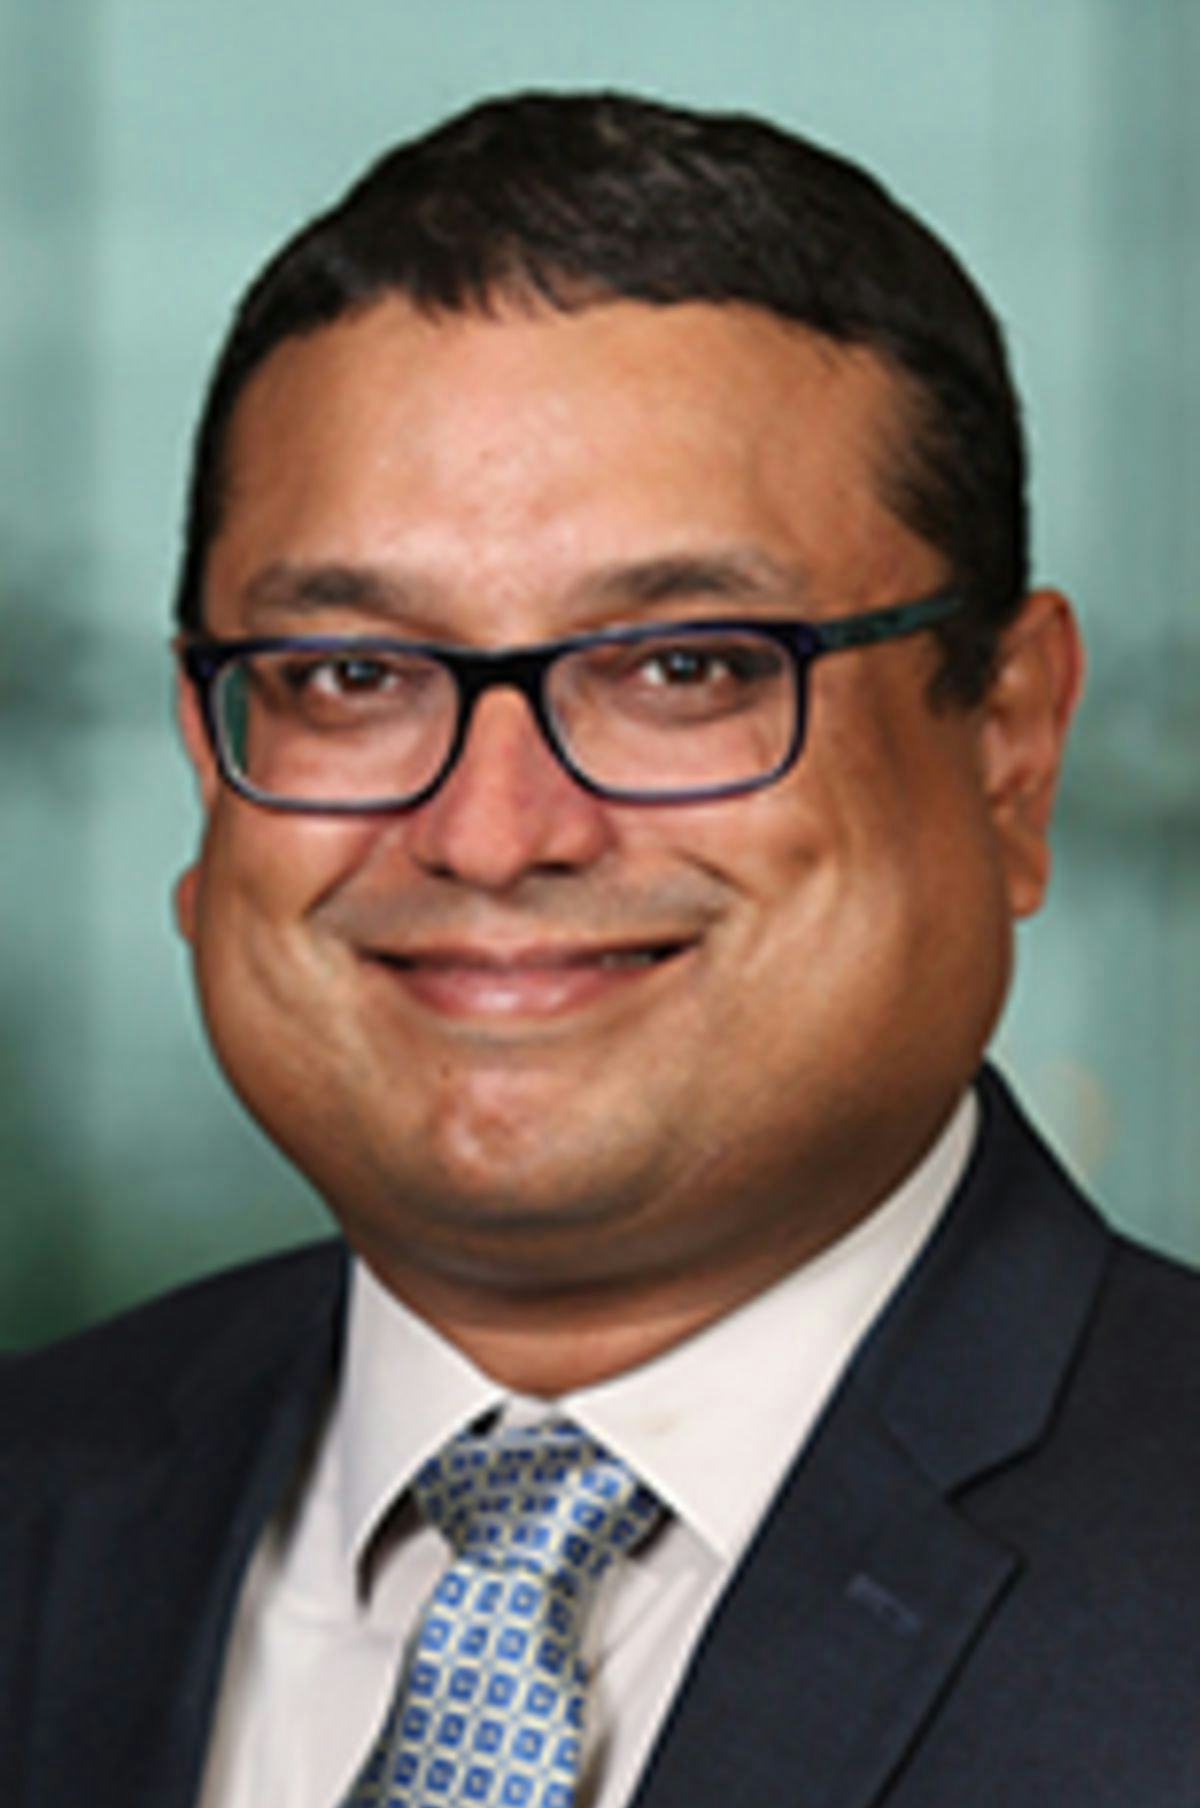 Headshot of Dr. Gaurav Sabnis with the New York City skyline visible in the background.